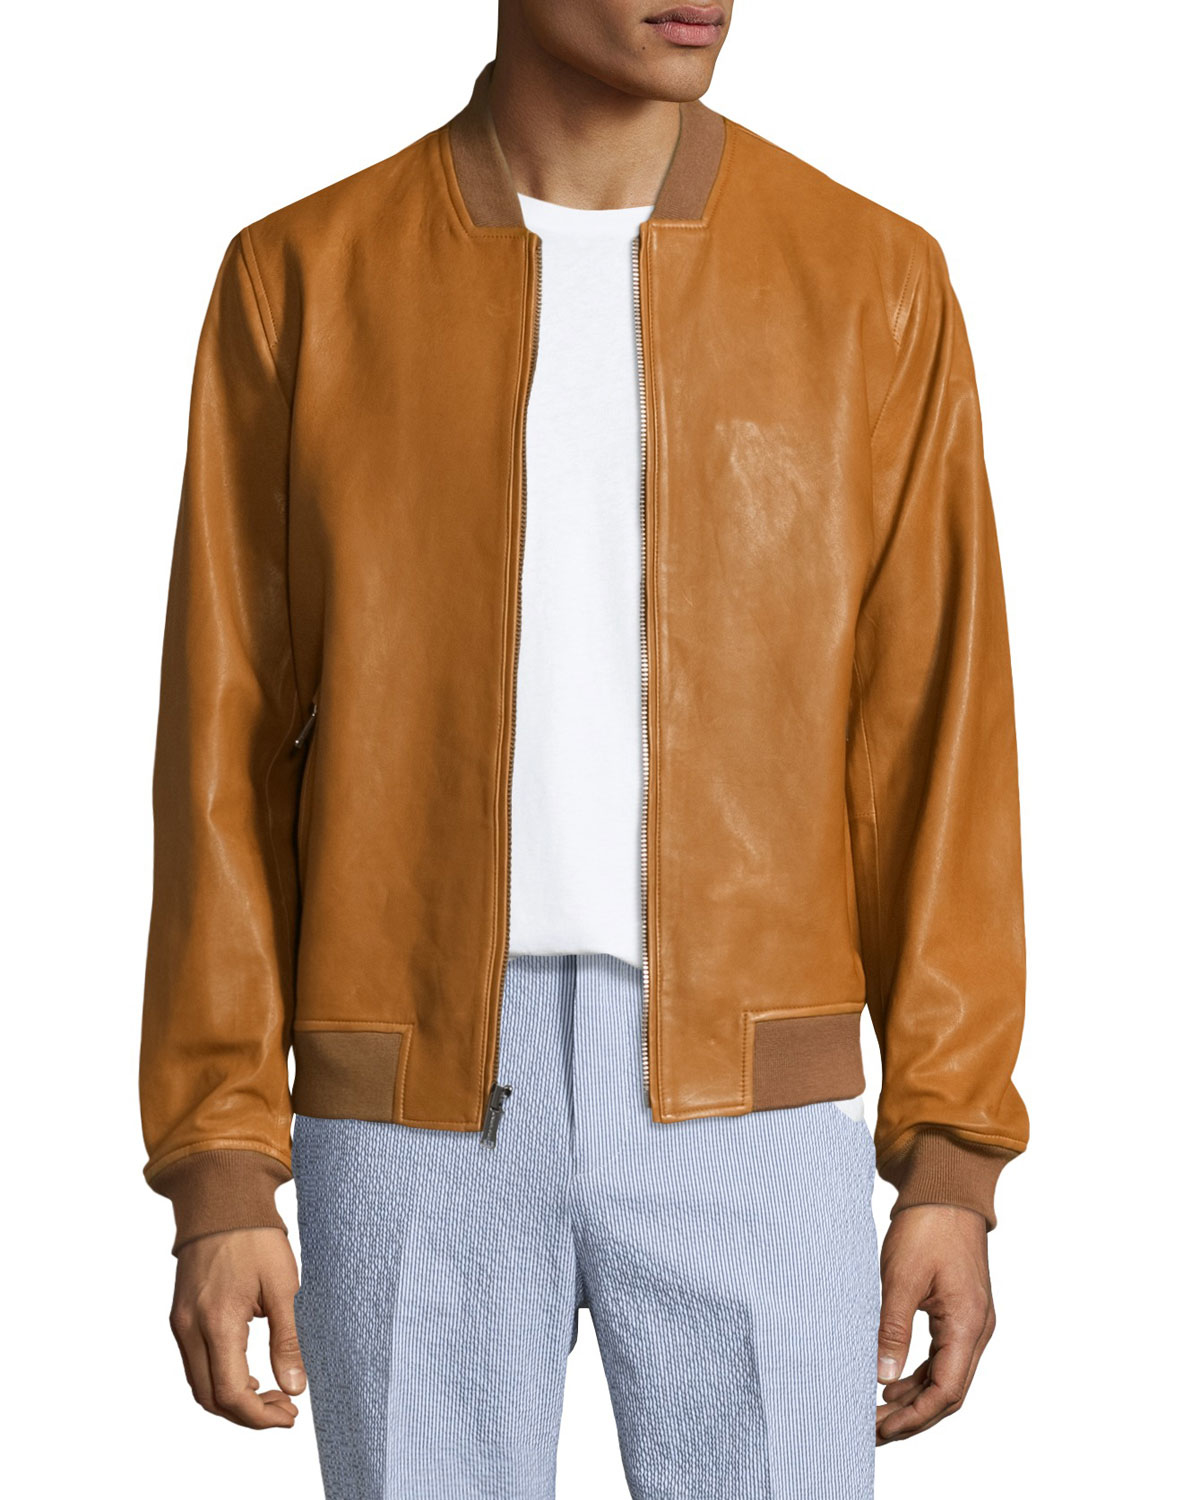 Lyst - Michael Kors Zip-up Leather Bomber Jacket in Brown for Men